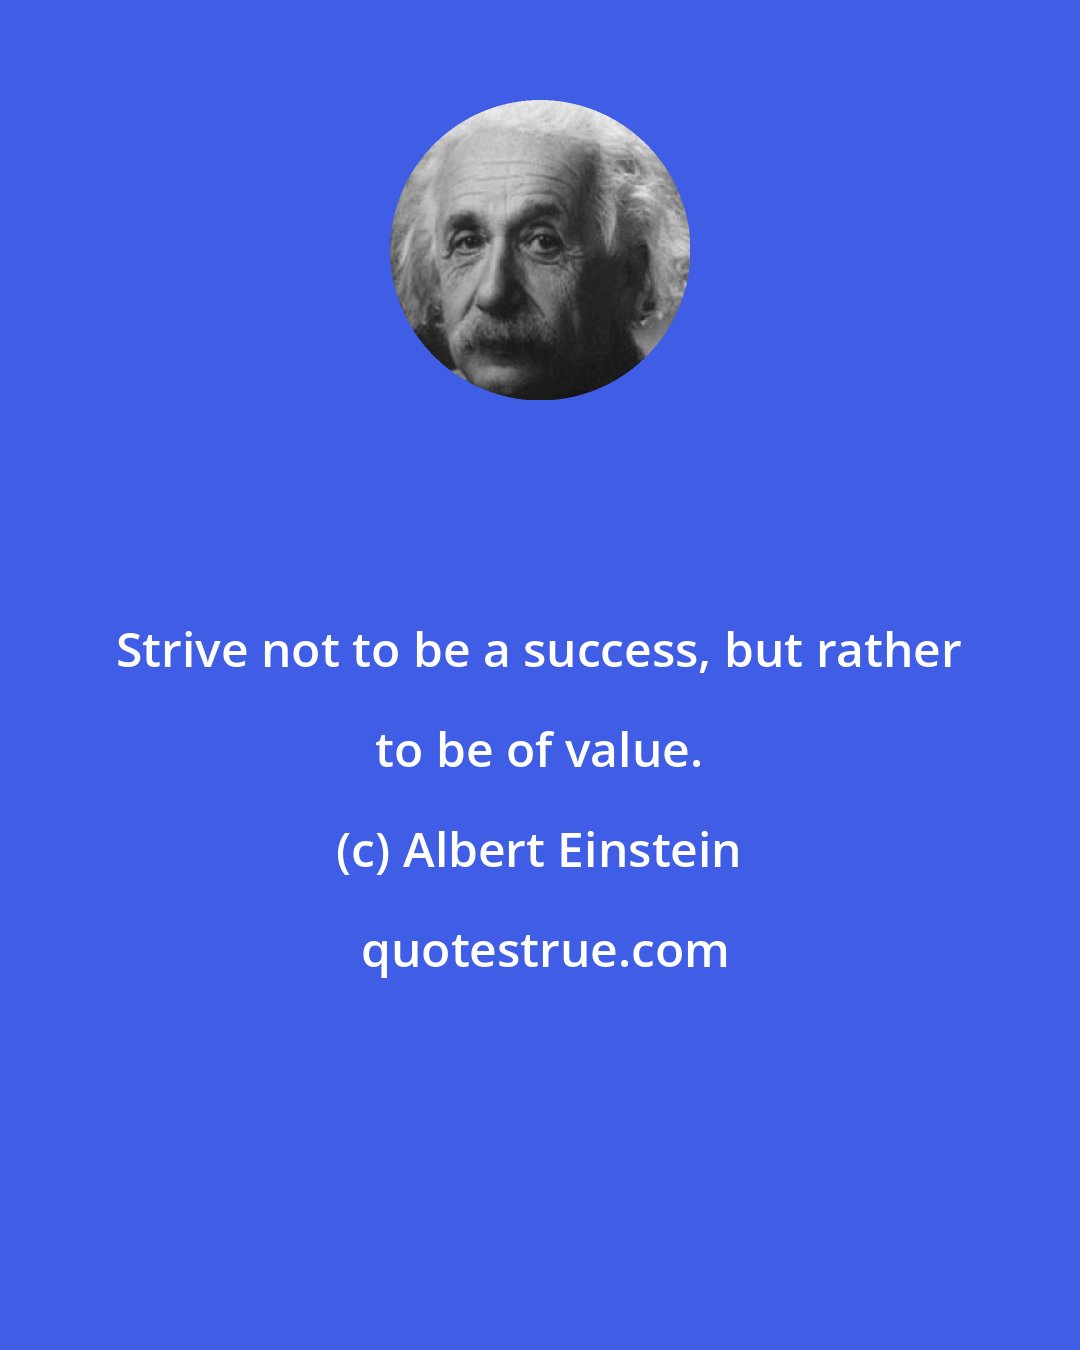 Albert Einstein: Strive not to be a success, but rather to be of value.